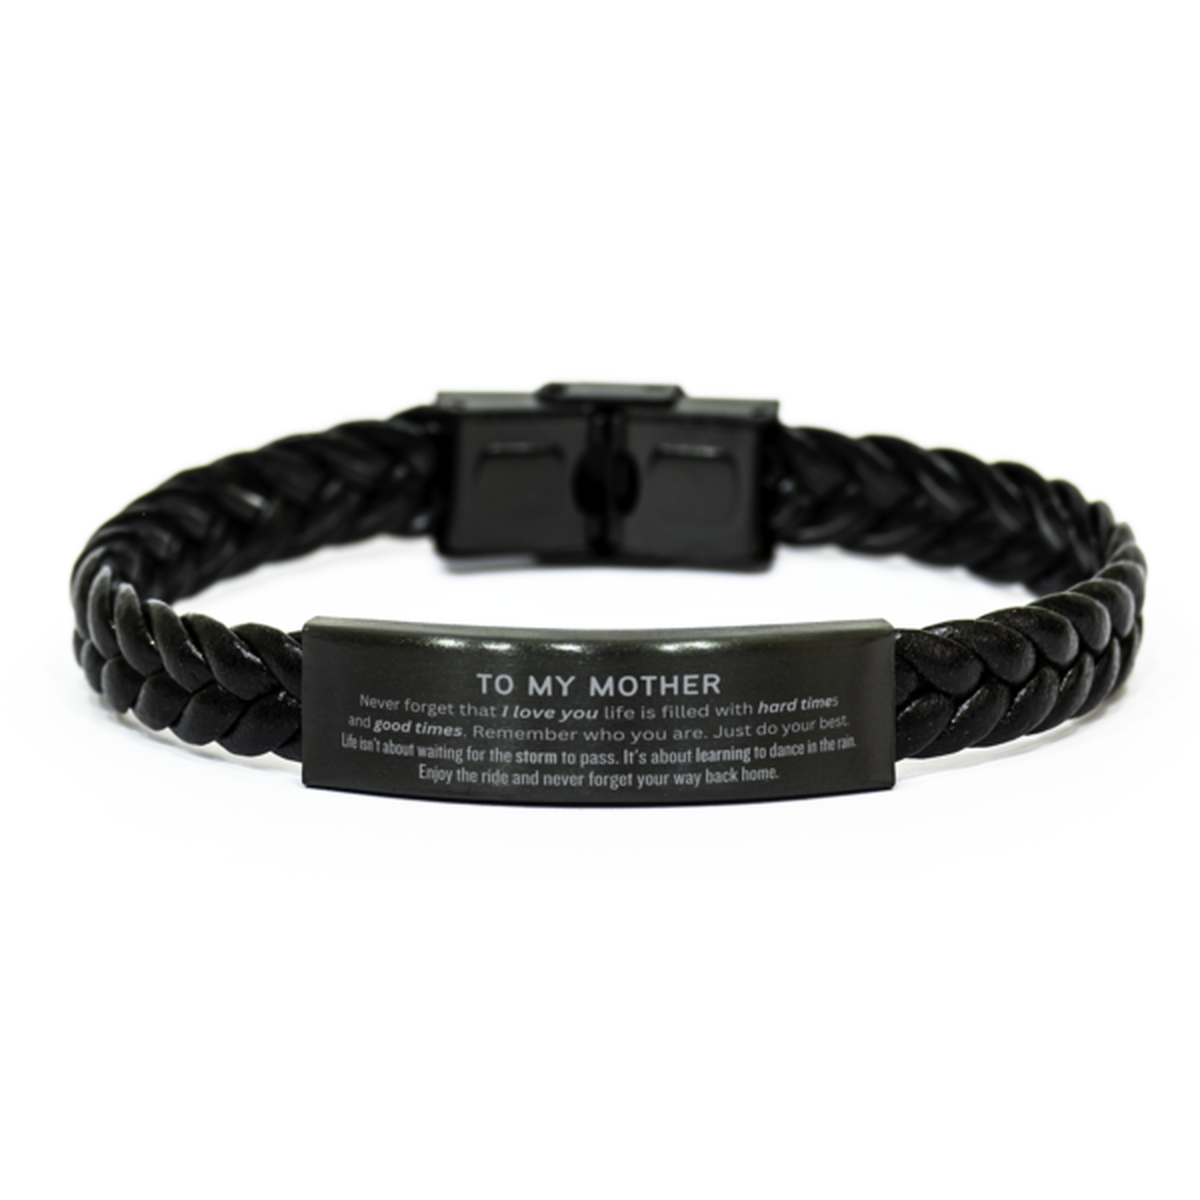 Christmas Mother Braided Leather Bracelet Gifts, To My Mother Birthday Thank You Gifts For Mother, Graduation Unique Gifts For Mother To My Mother Never forget that I love you life is filled with hard times and good times. Remember who you are. Just do yo